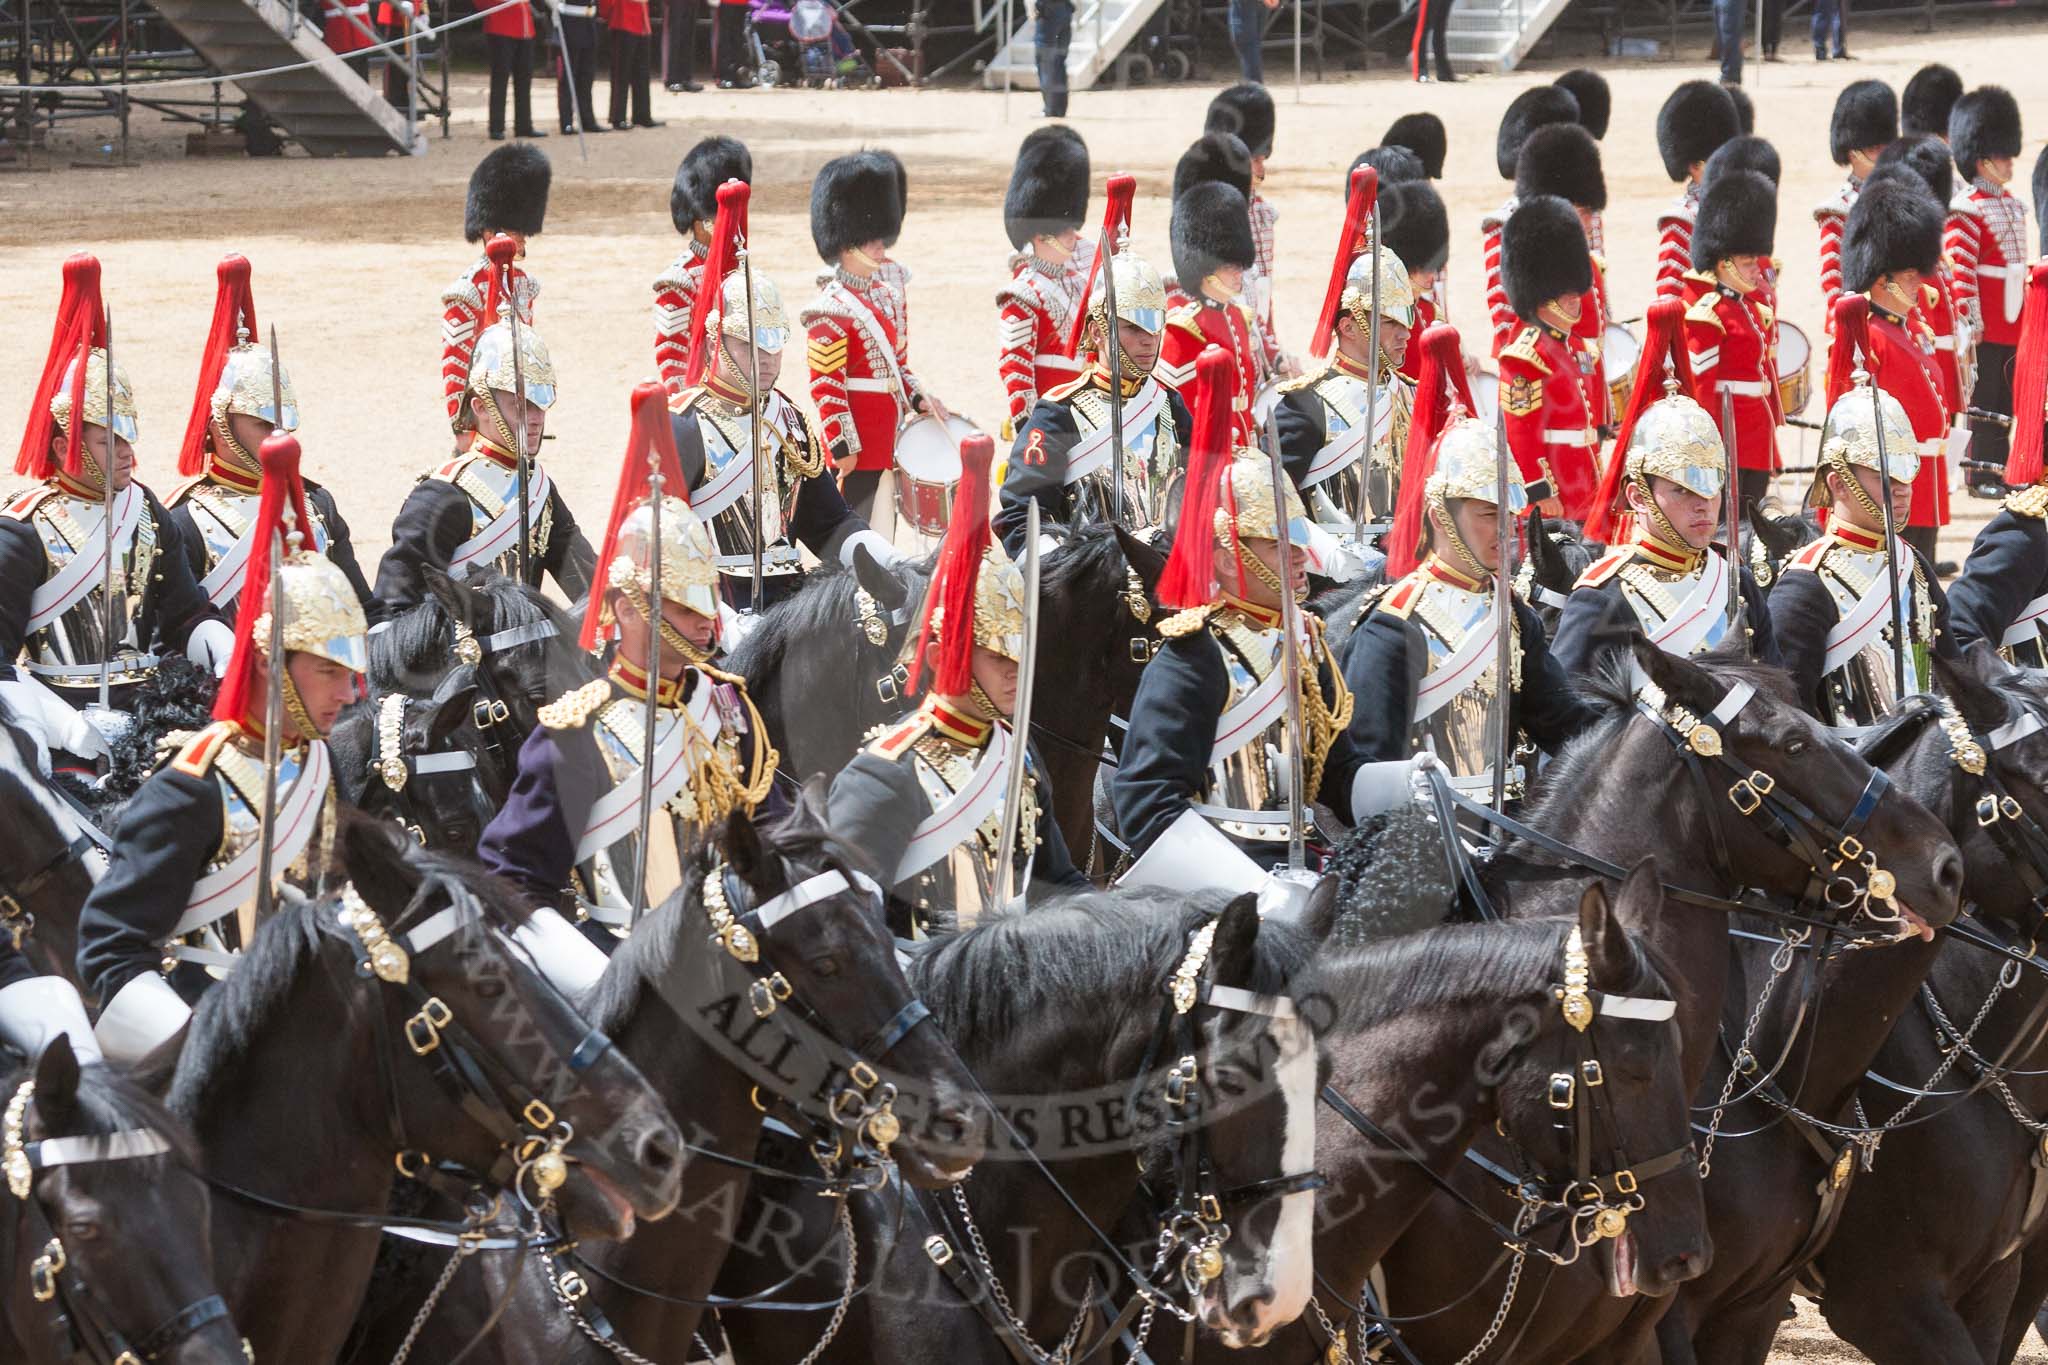 The Colonel's Review 2015.
Horse Guards Parade, Westminster,
London,

United Kingdom,
on 06 June 2015 at 11:54, image #507